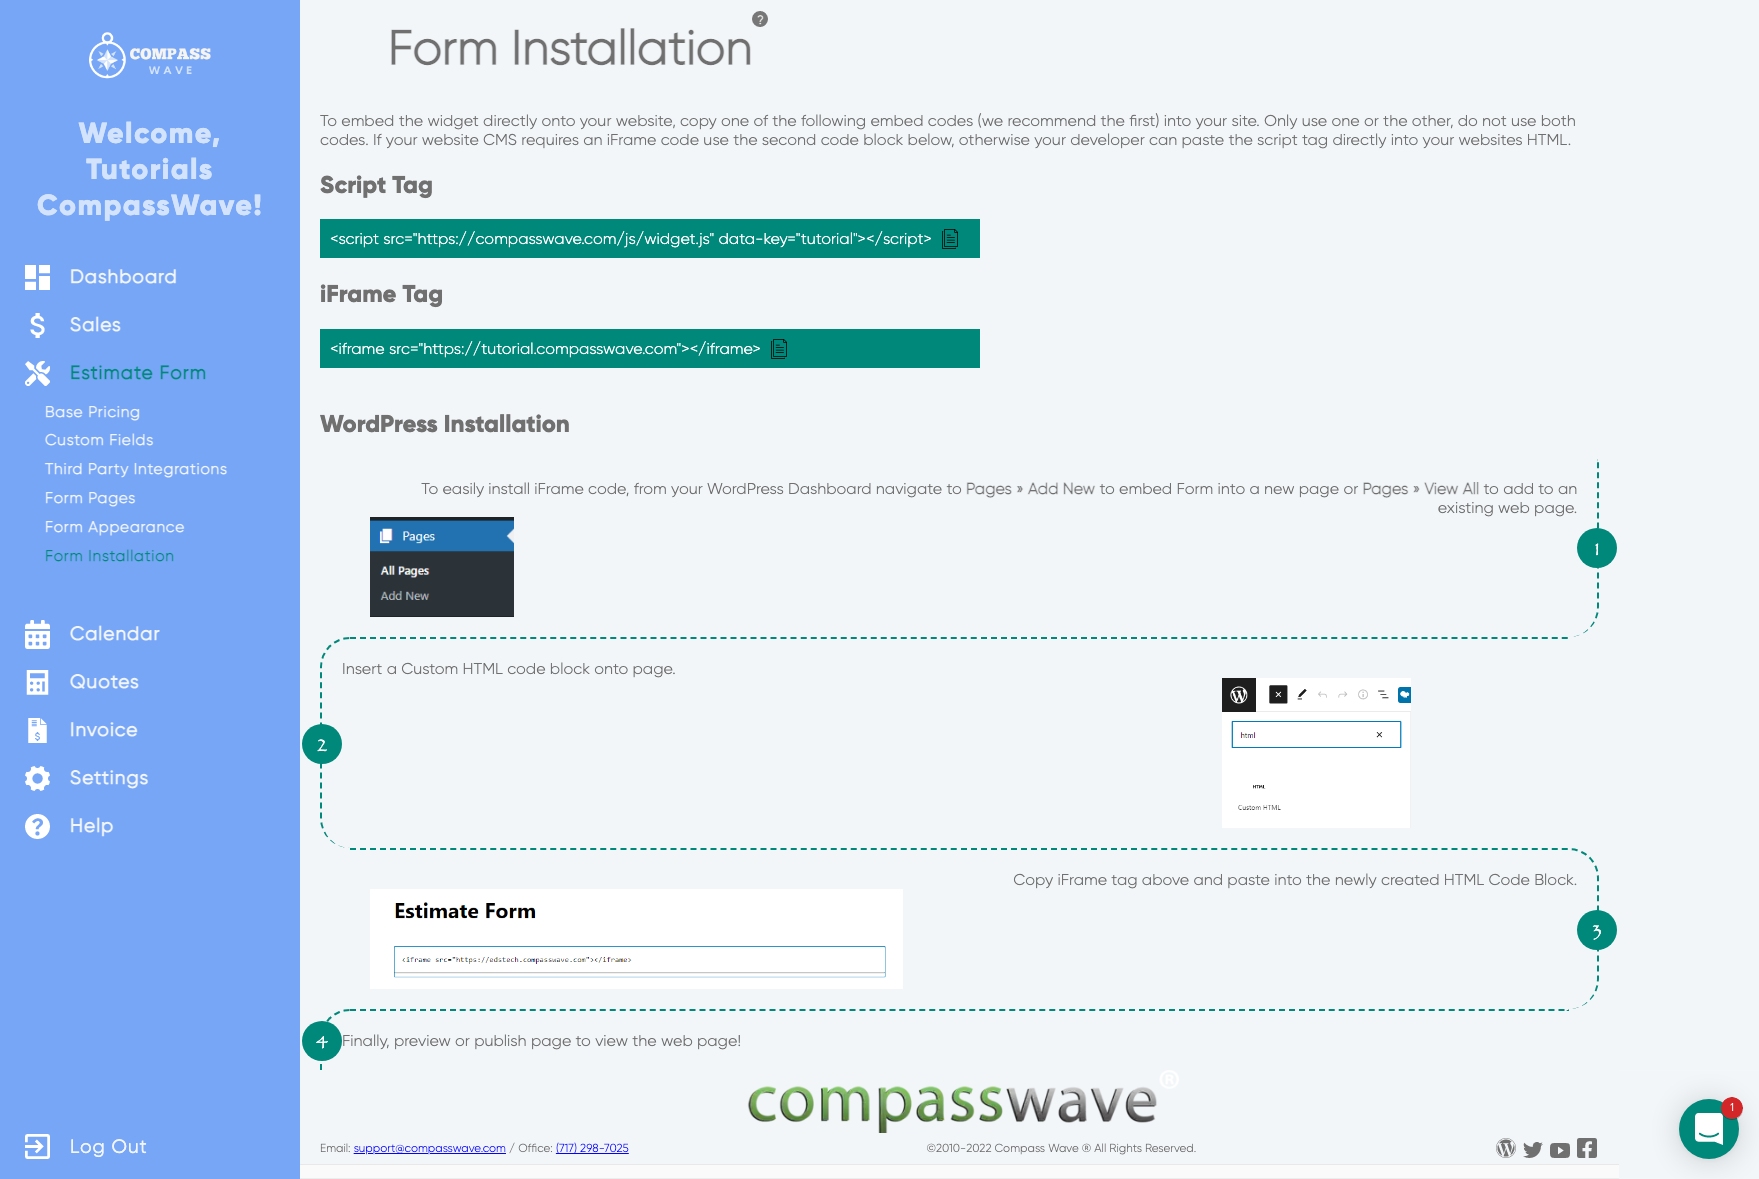 Form Installation - This is the page where you will be able to copy the Script or Iframe code to place our tool on your website. We also have Wordpress specific instructions as well.